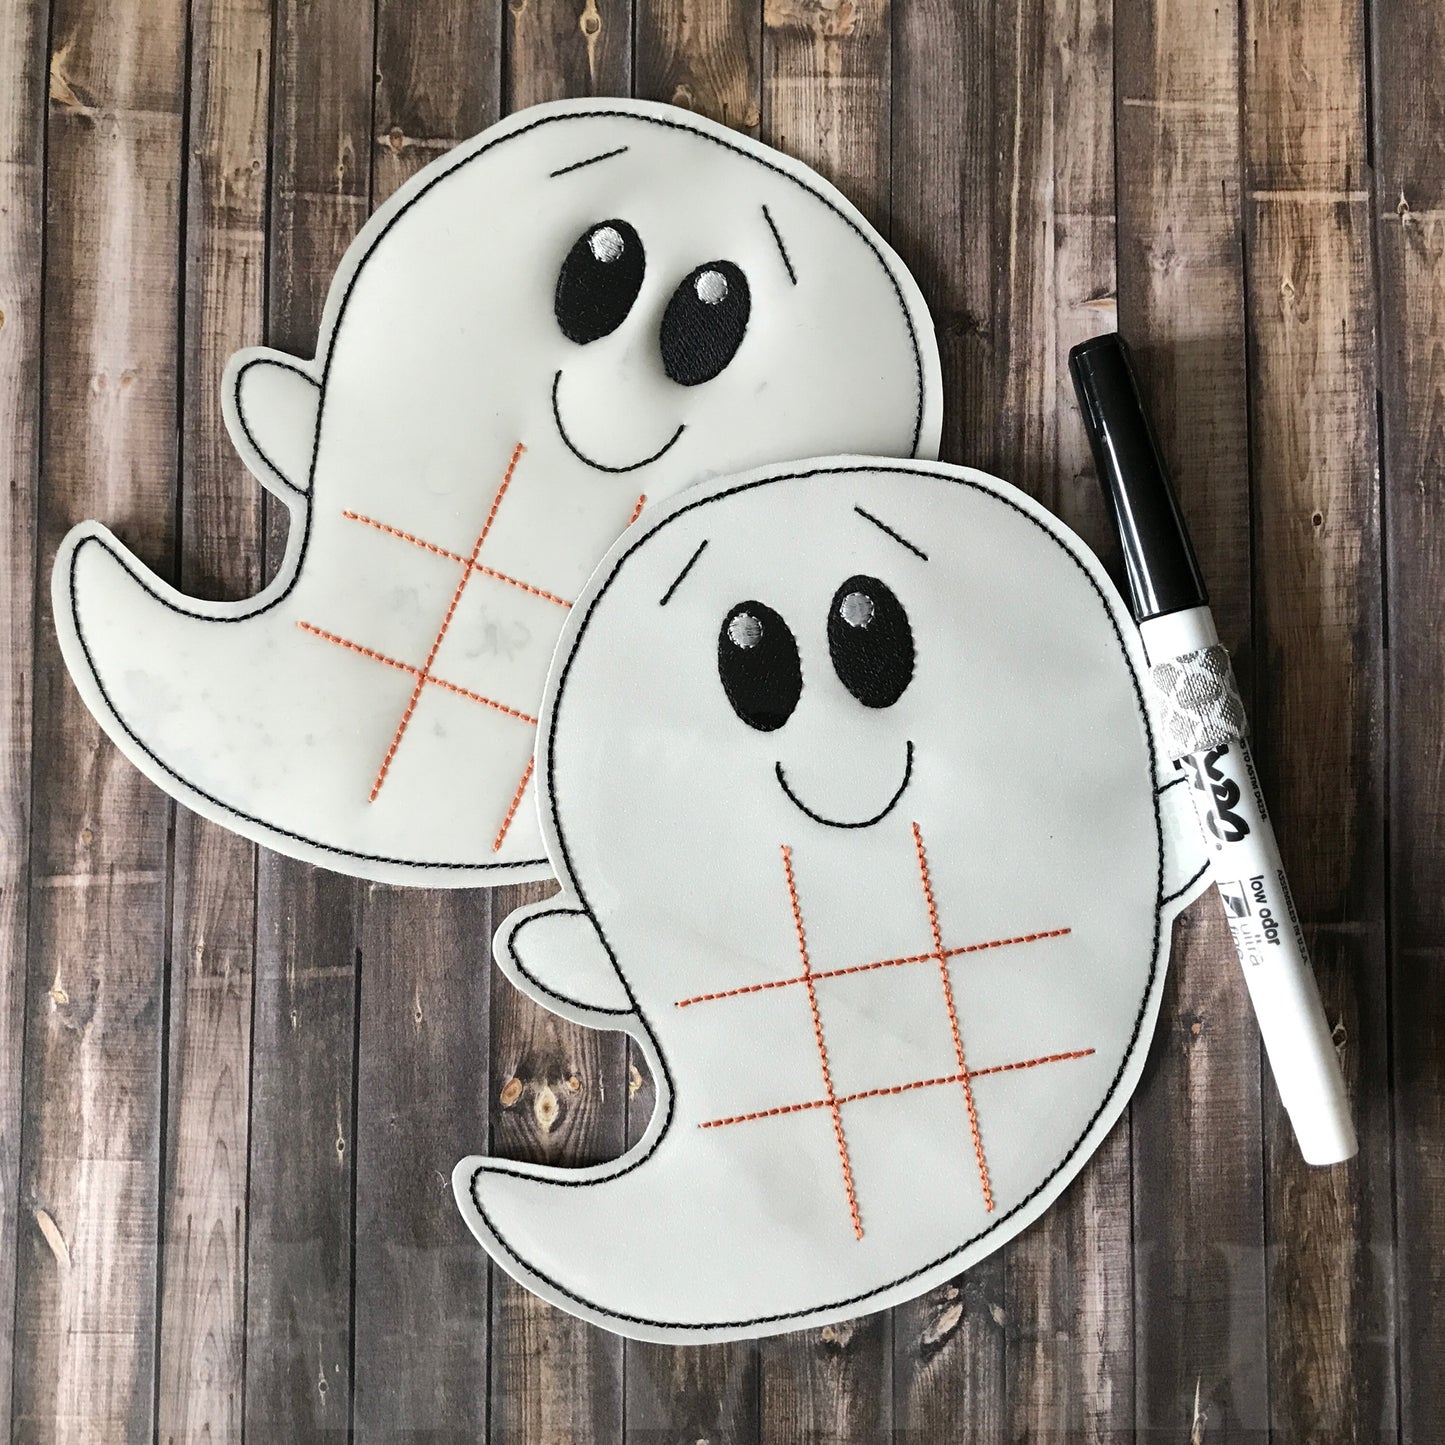 Ghost Tic Tac Toe Boards - 4 sizes - Digital Embroidery Design